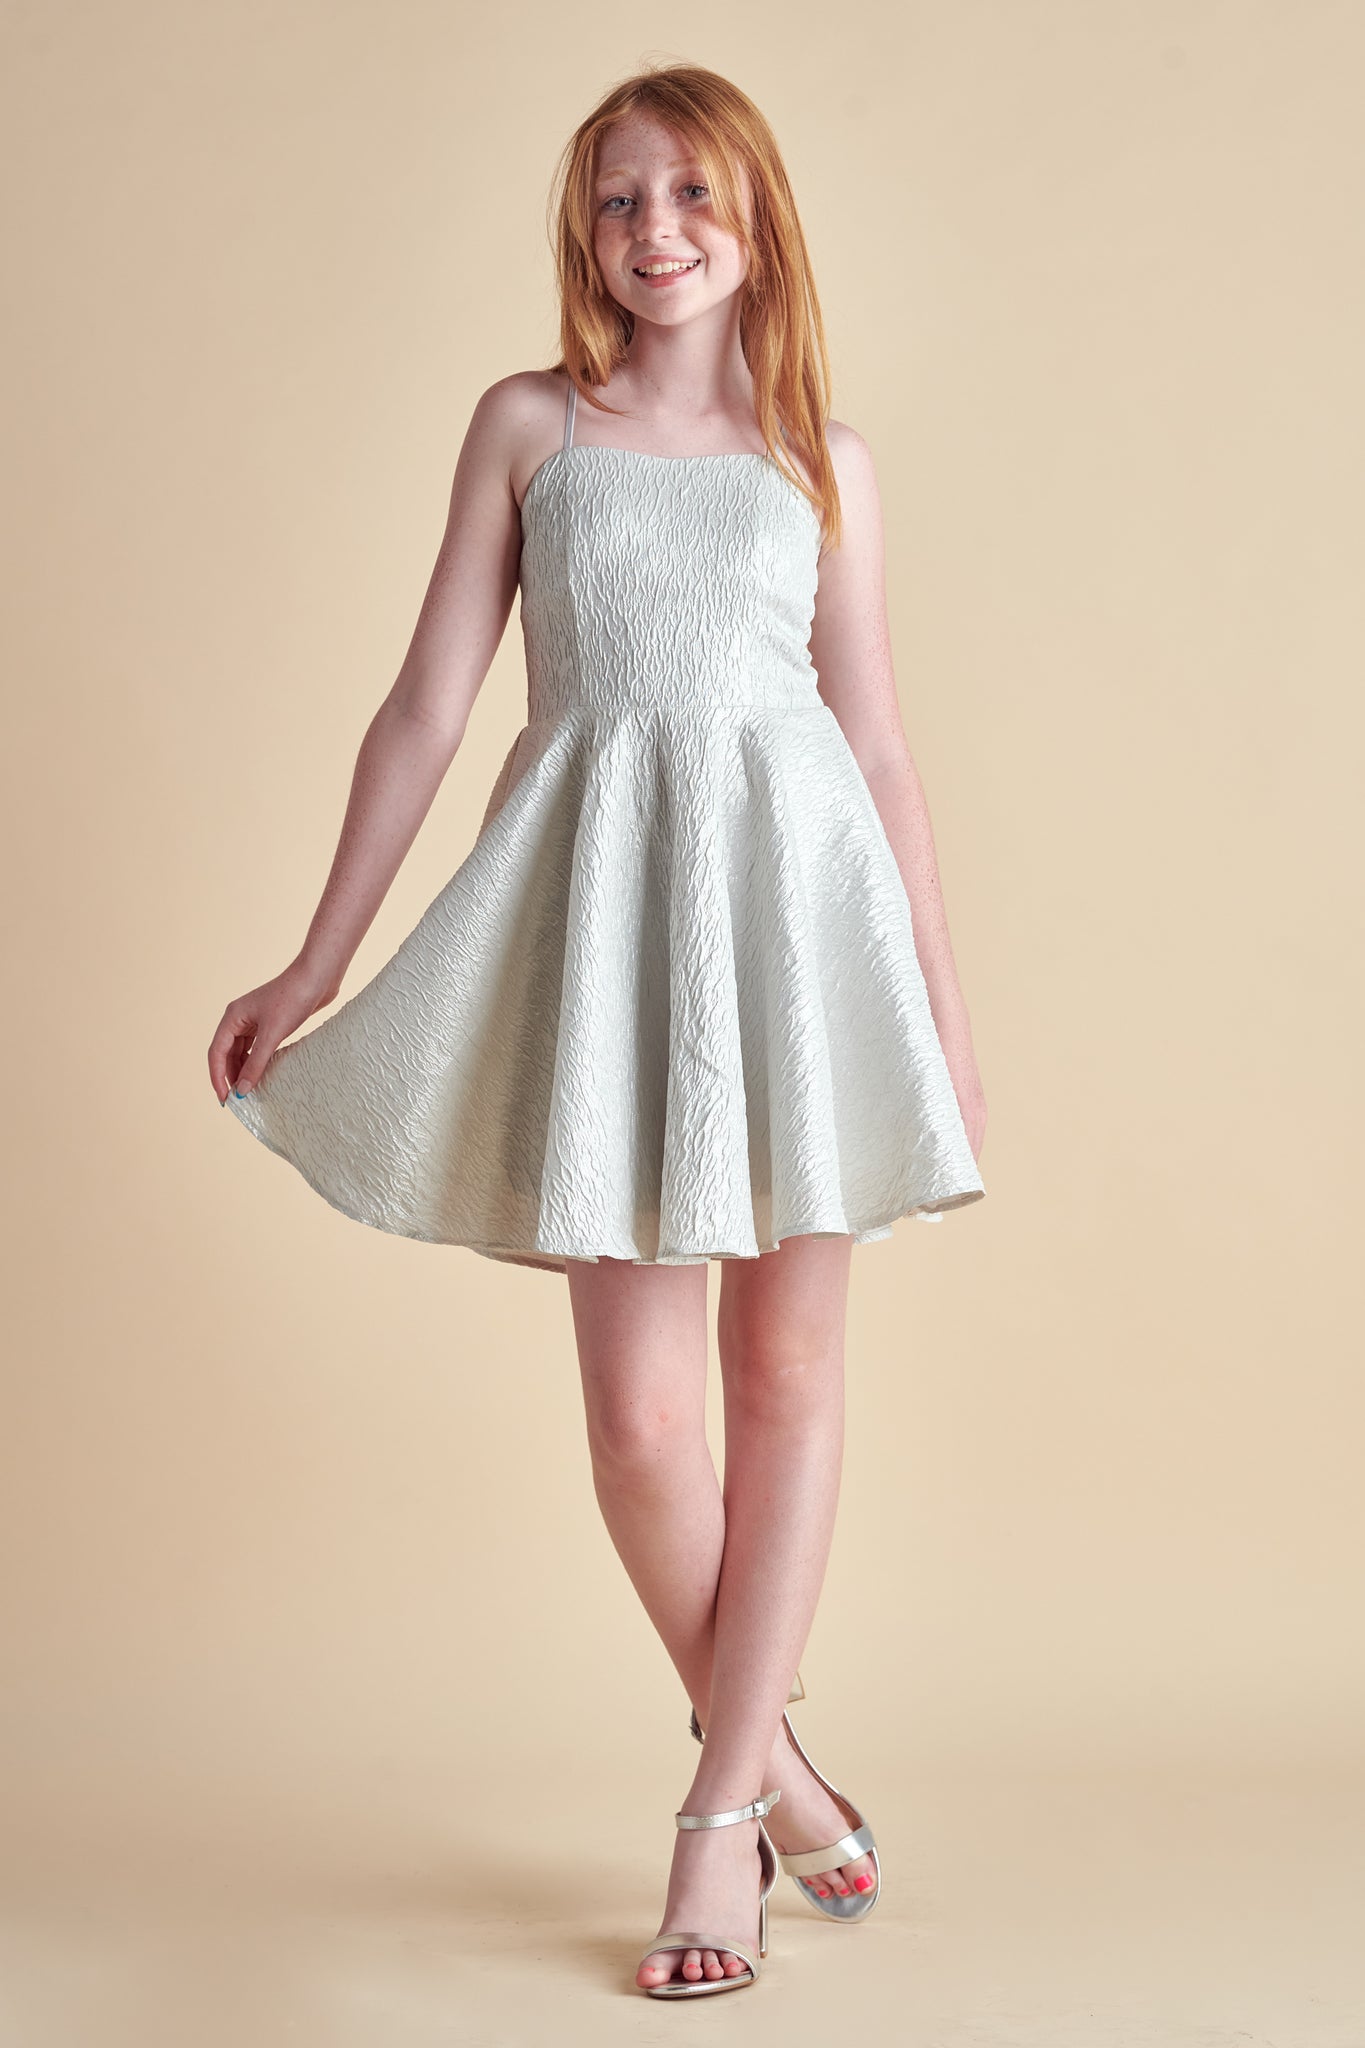 A red haired girl in an all over non-stretch, texture fabric dress made in a longer length in silver. It hits right above the knee and features a full circle skirt.